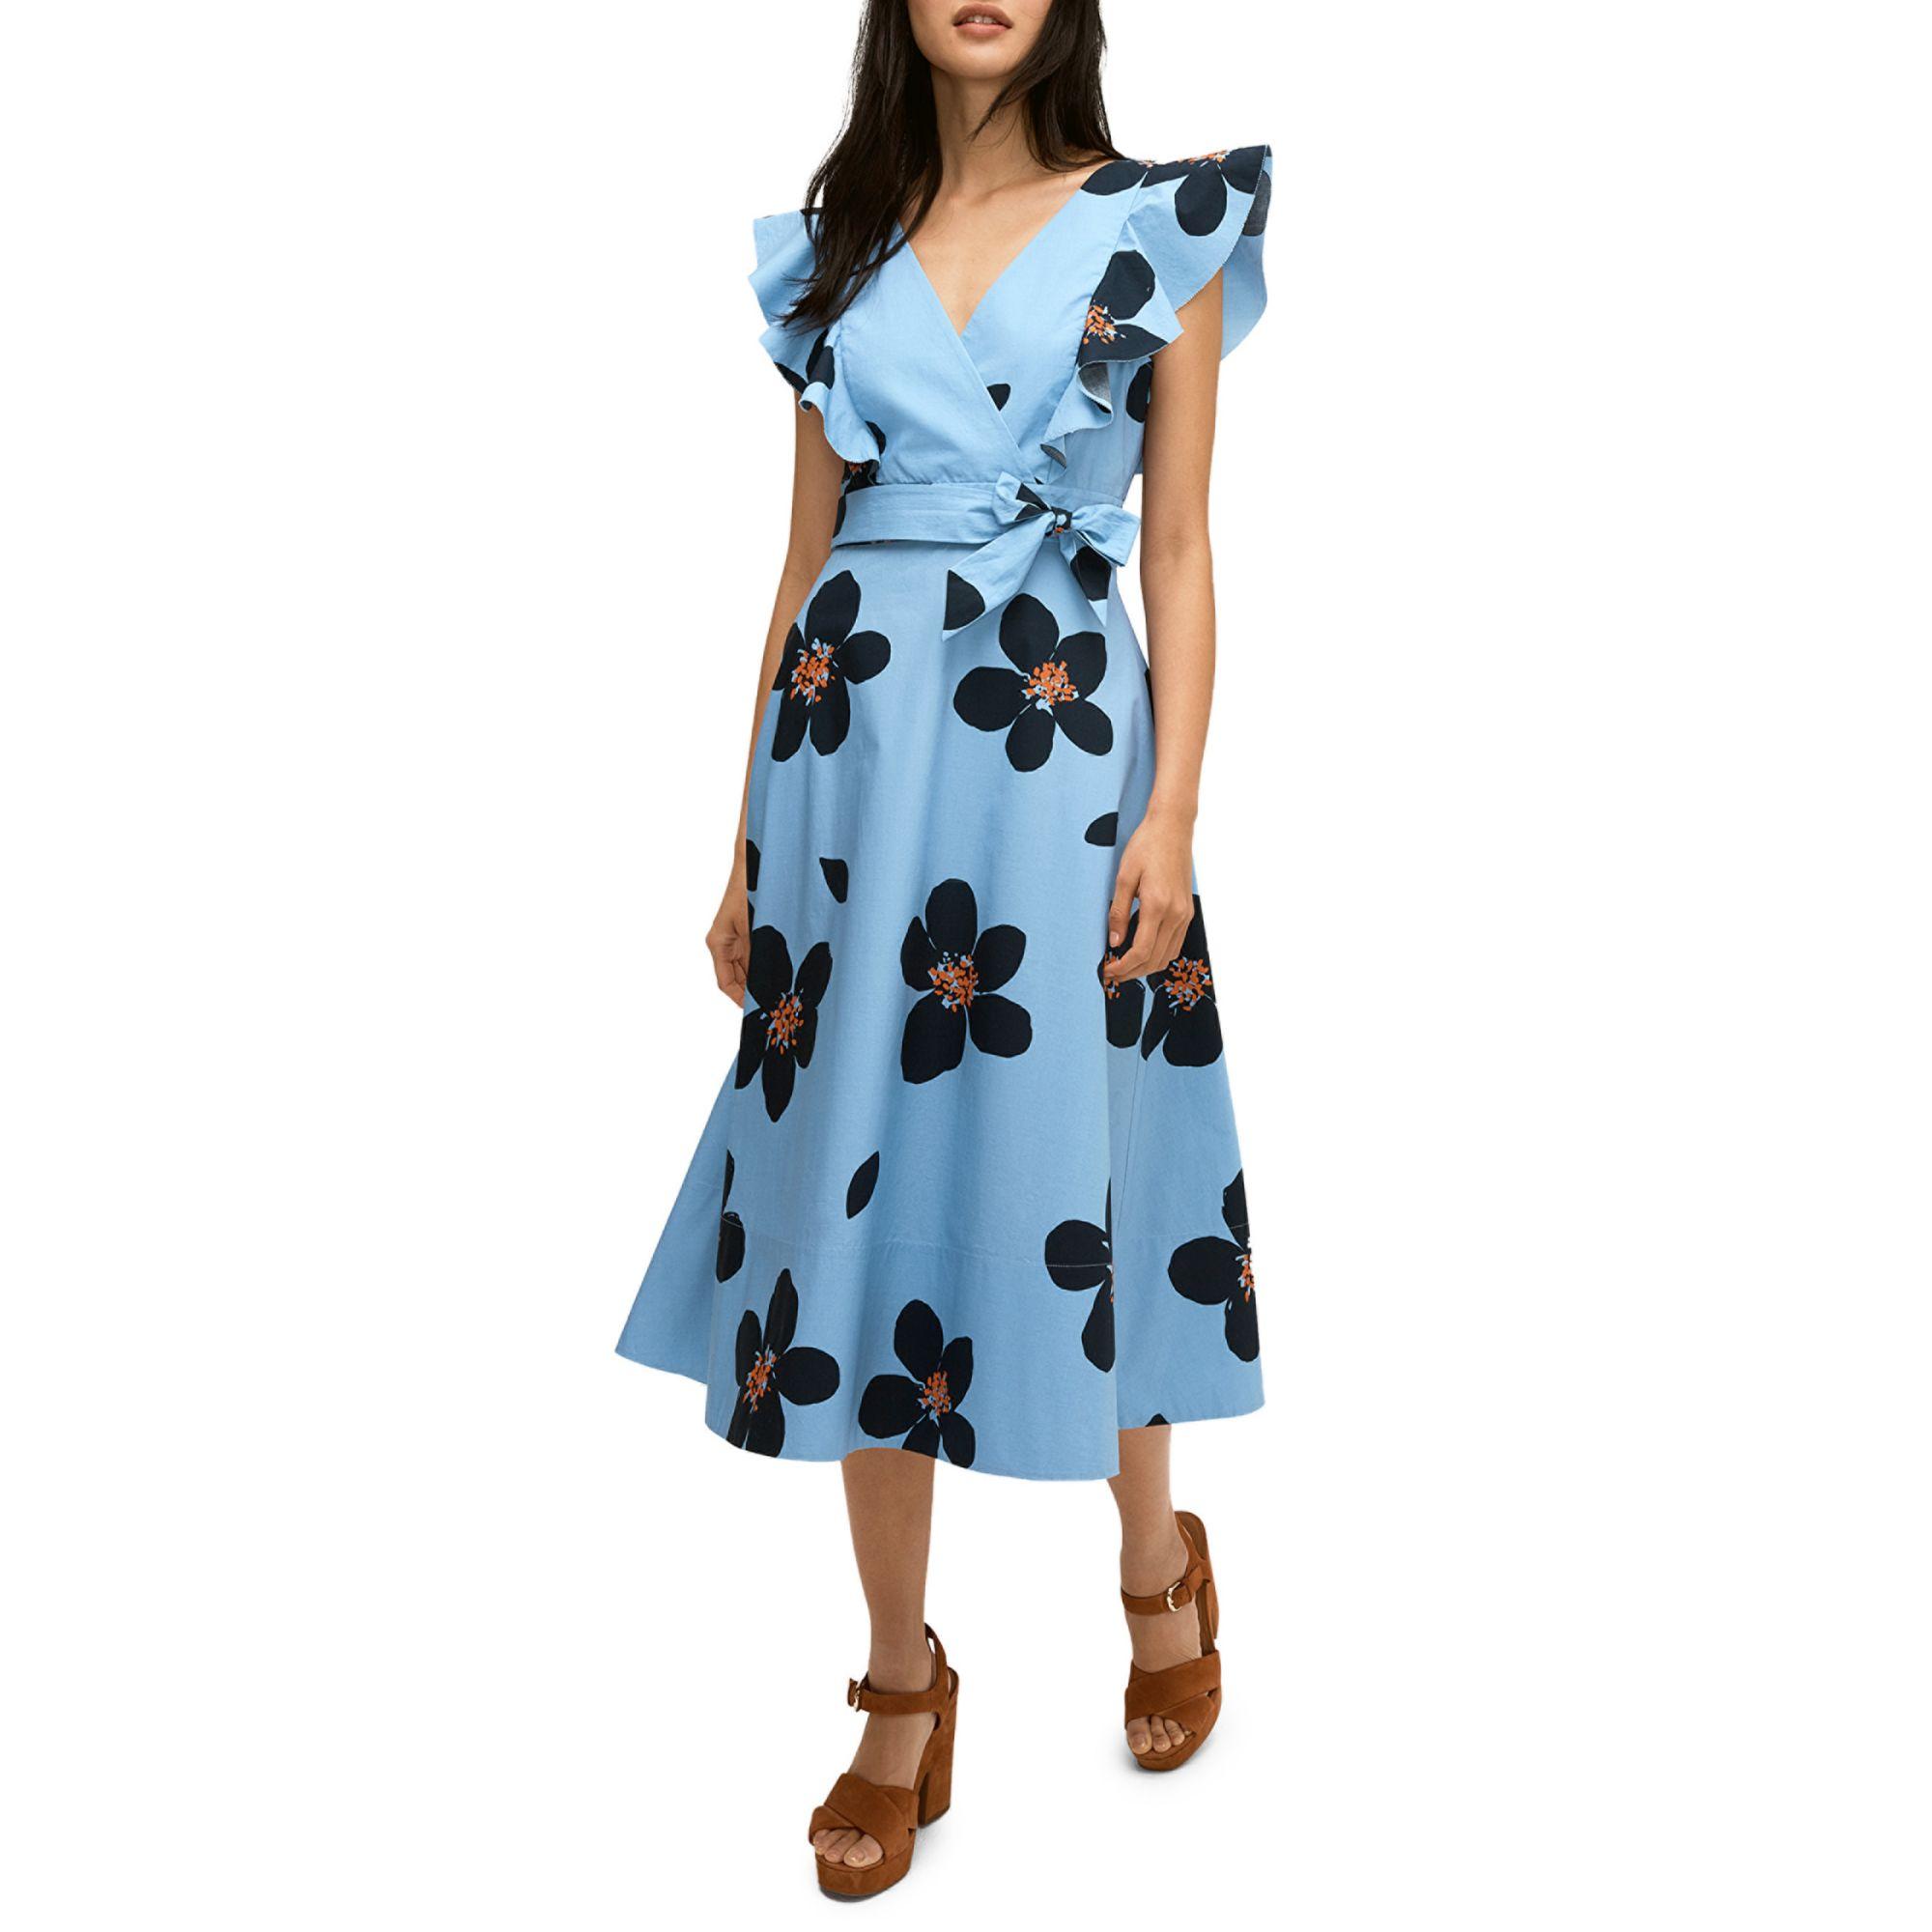 Kate Spade Cotton Grand Floral Midi Wrap Dress in Blue - Lyst